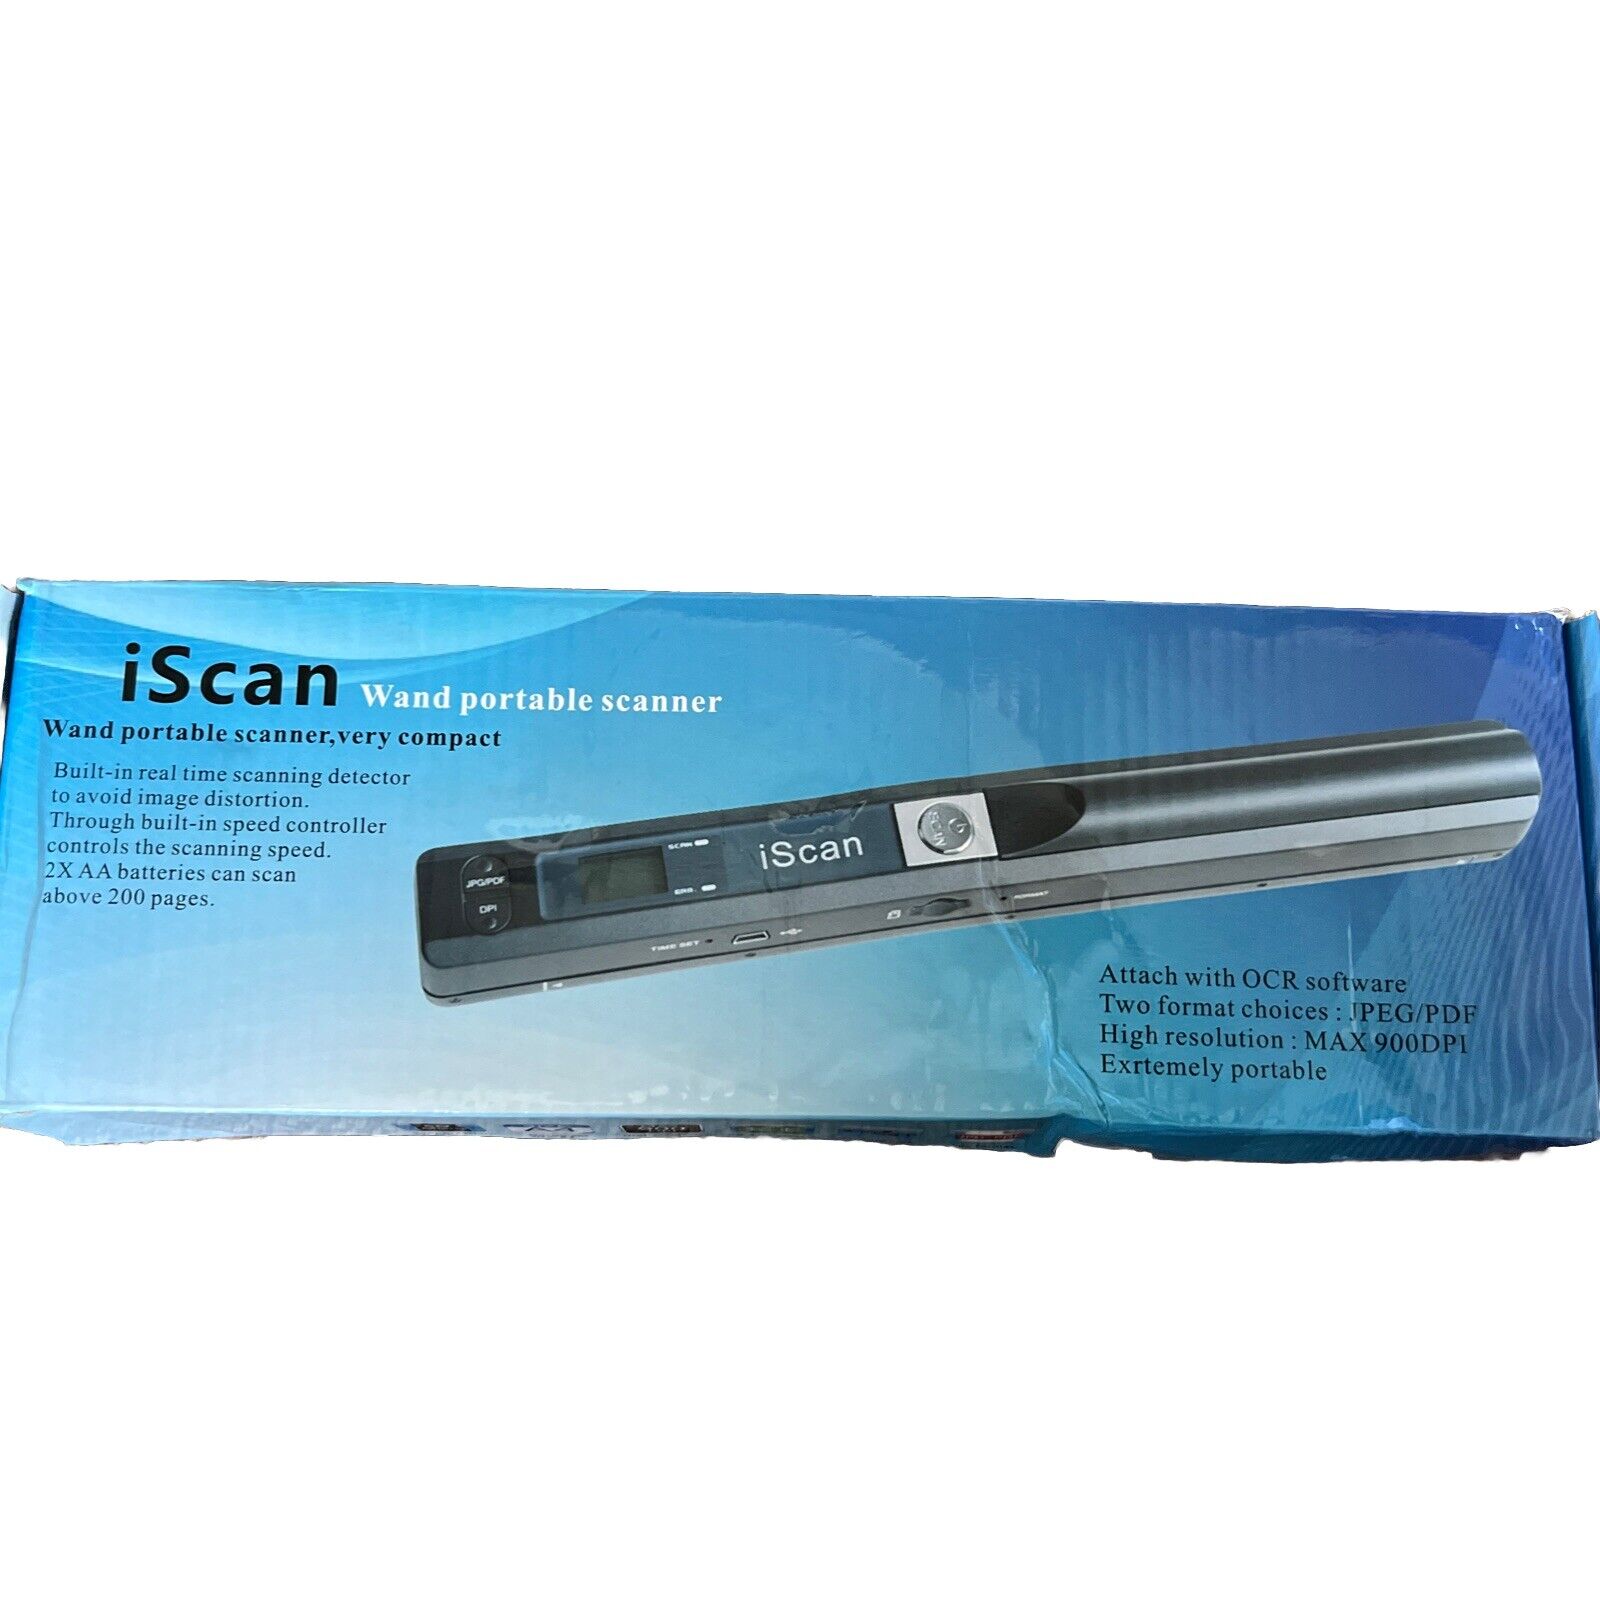 iScan Wand Portable Scanner Compact JPEG/PDF 900 DPI, Up to 32GB, new in box